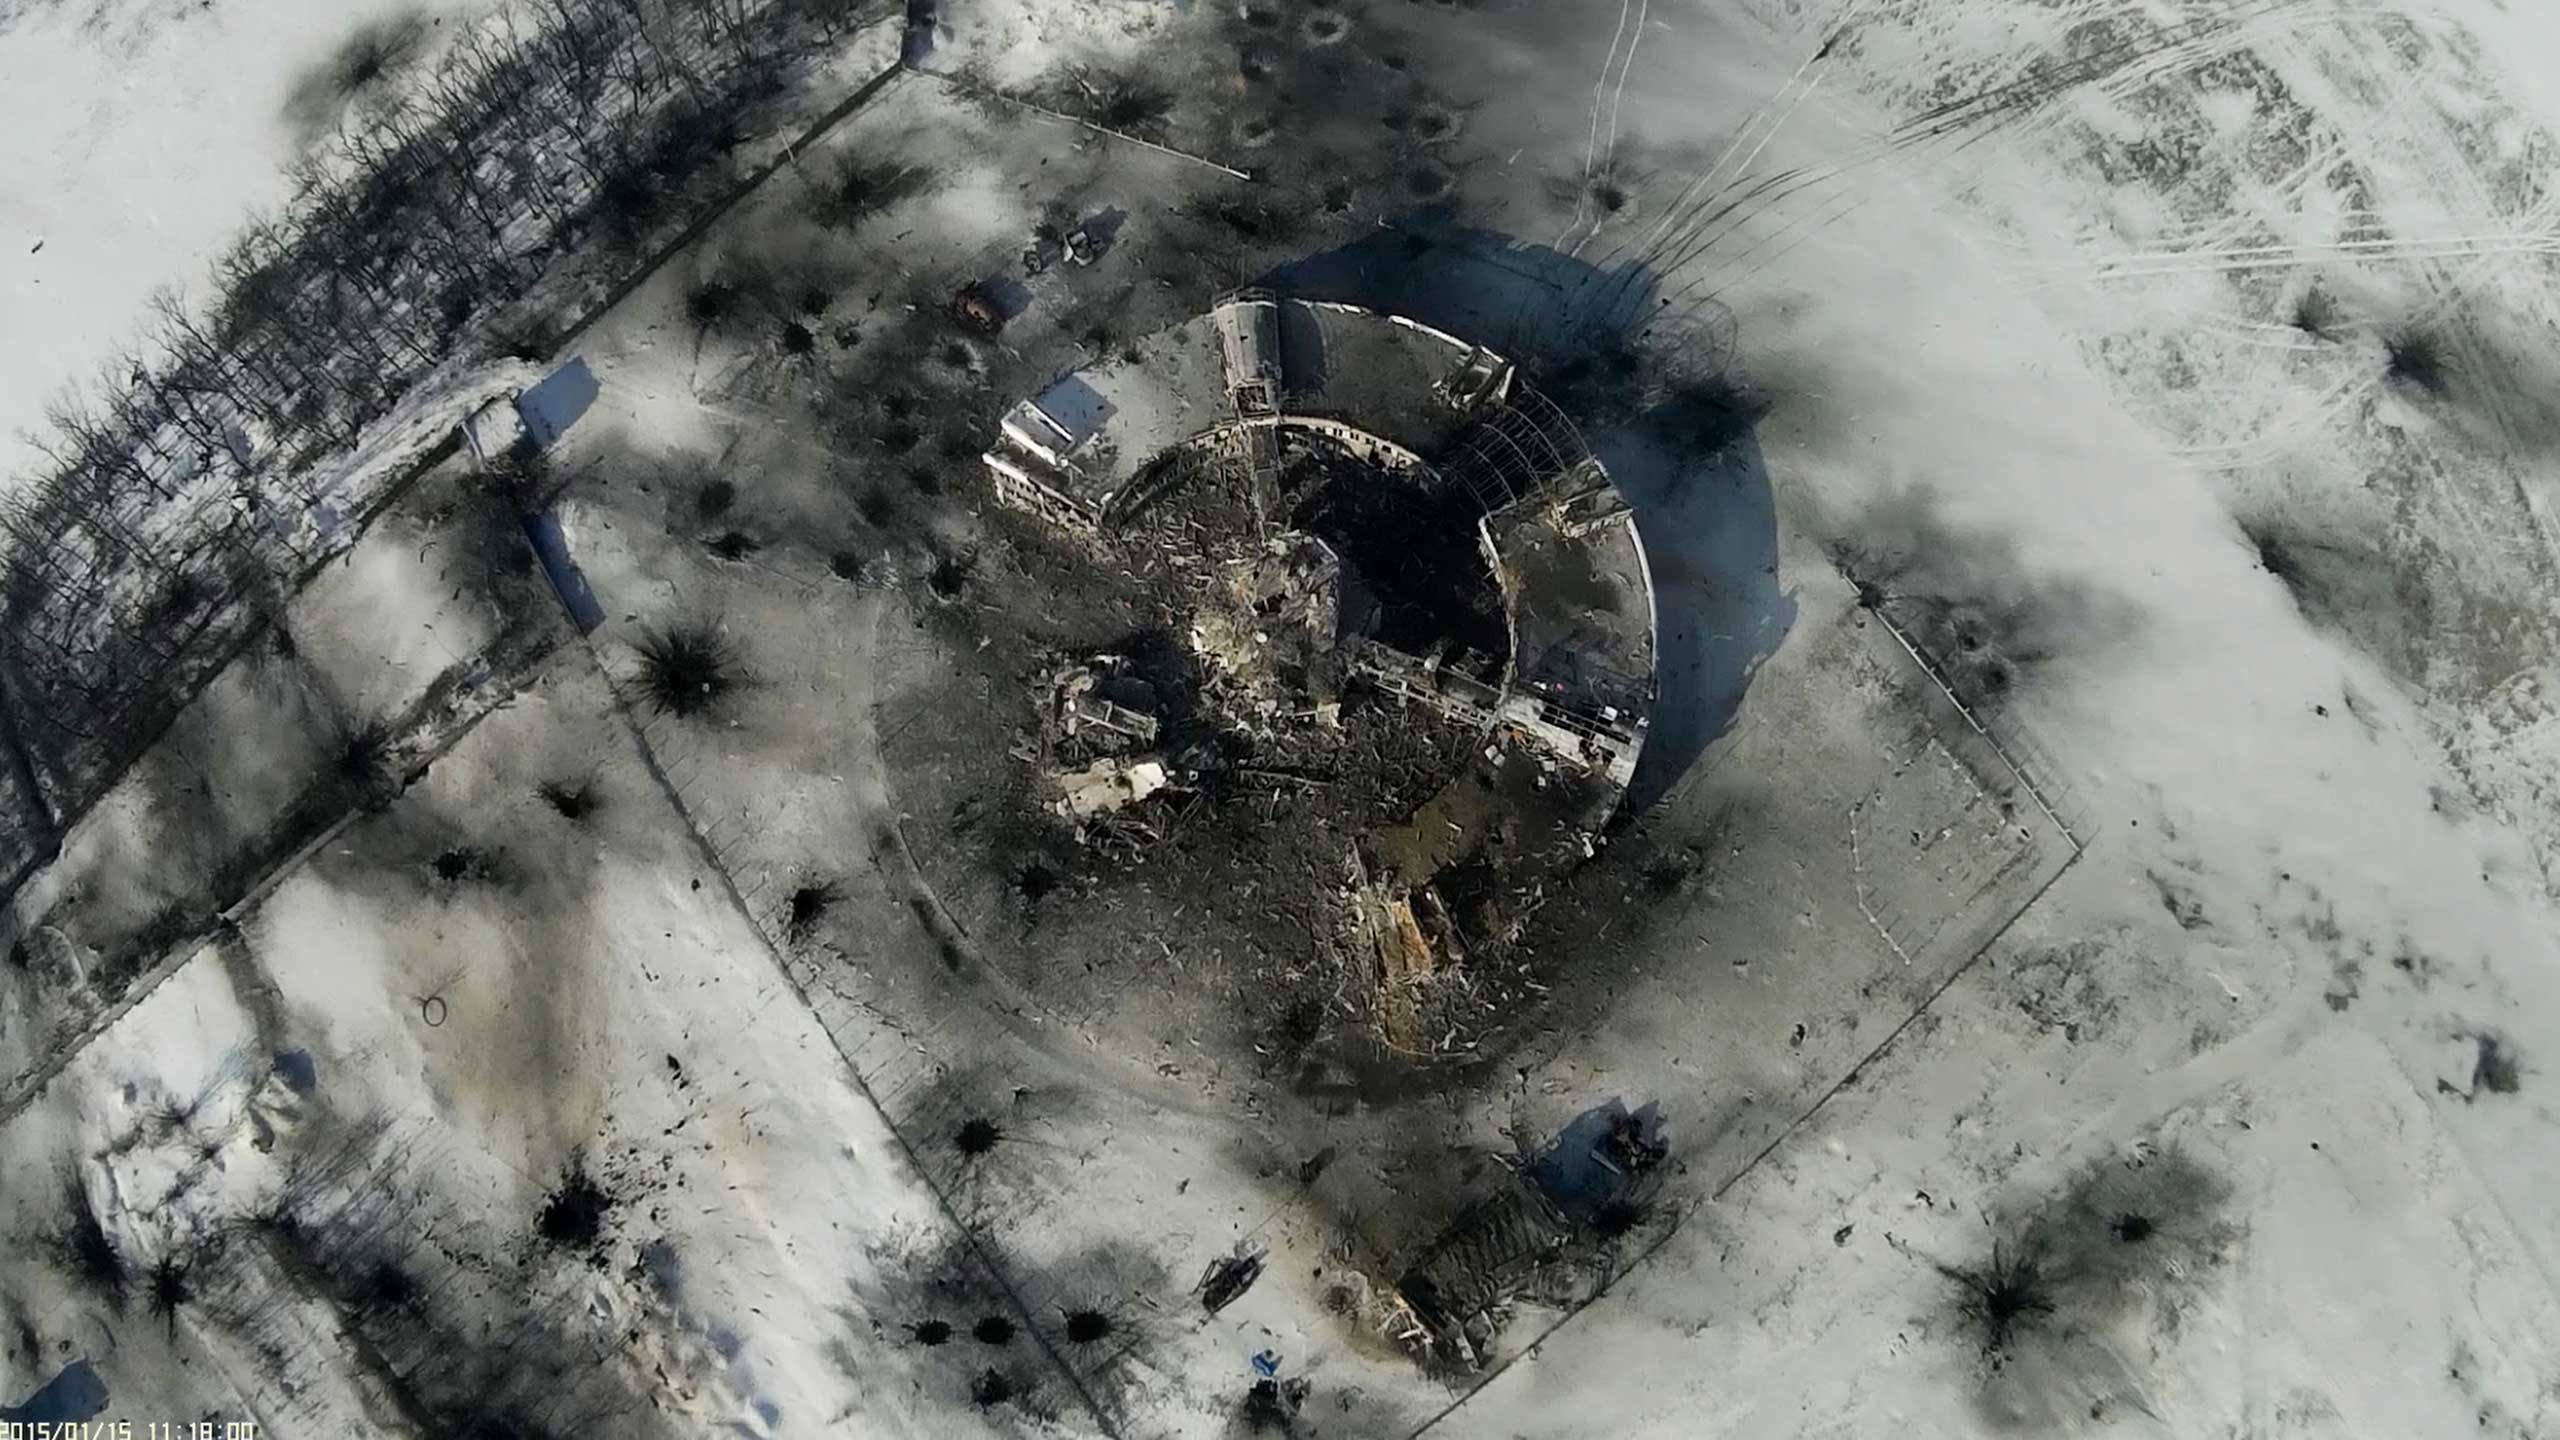 The destroyed control tower at the airport in Donetsk, eastern Ukraine, Jan. 15, 2015.